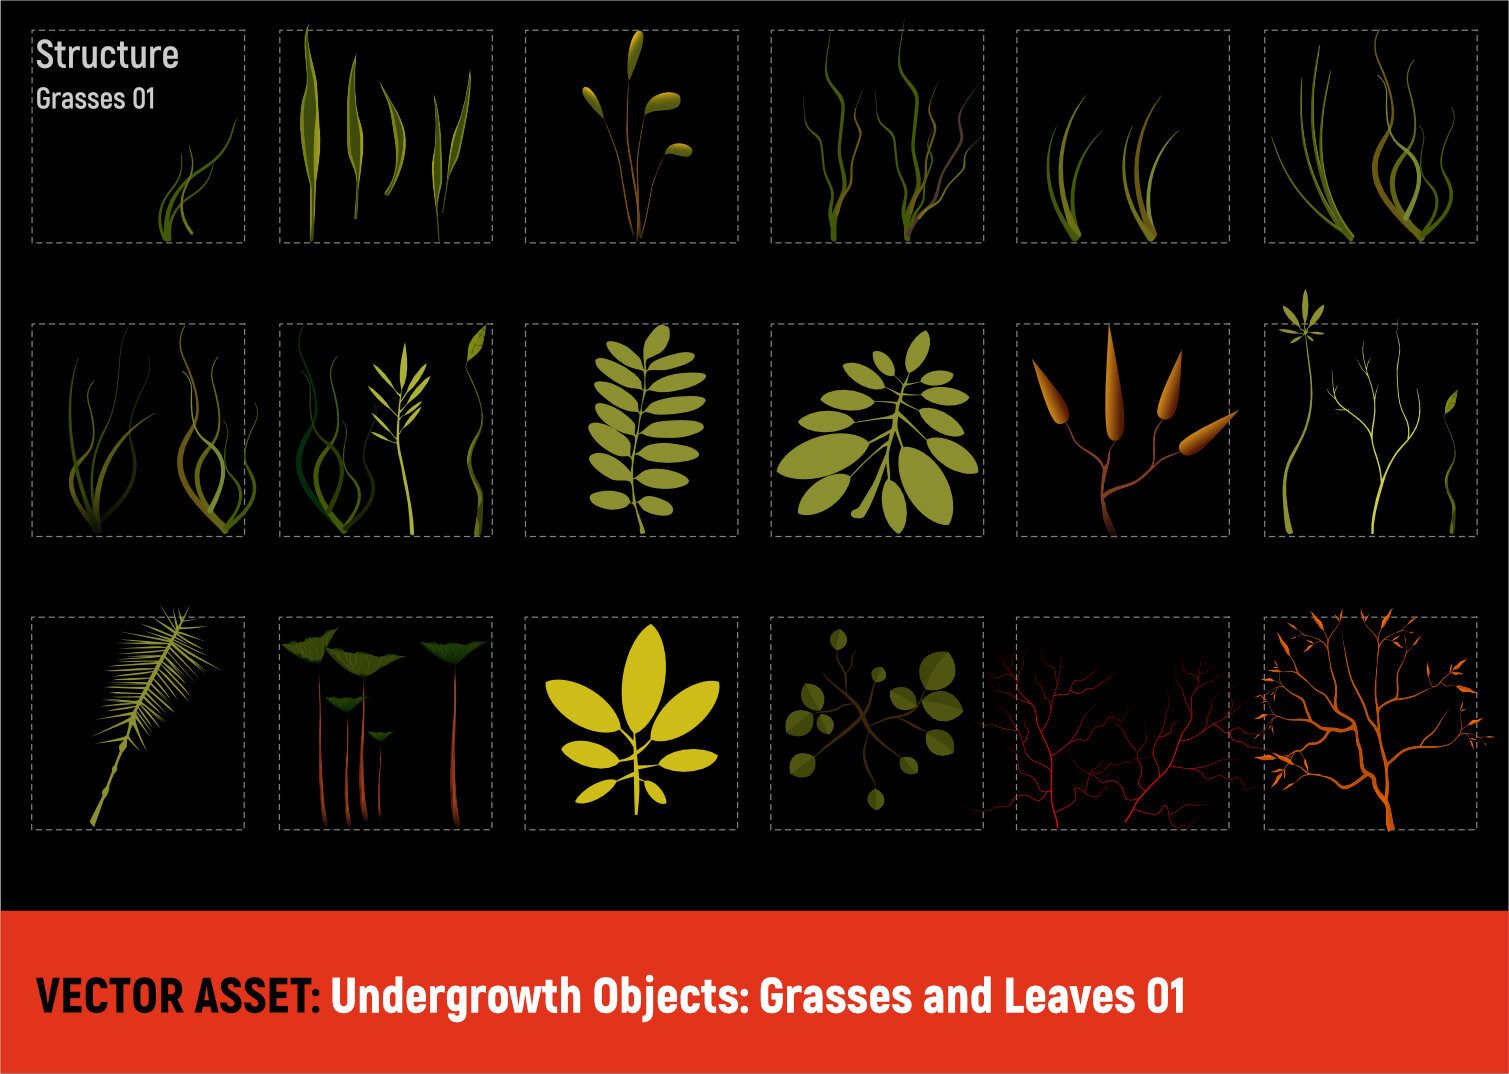 Undergrowth Vector Objects
Grass and Foliage